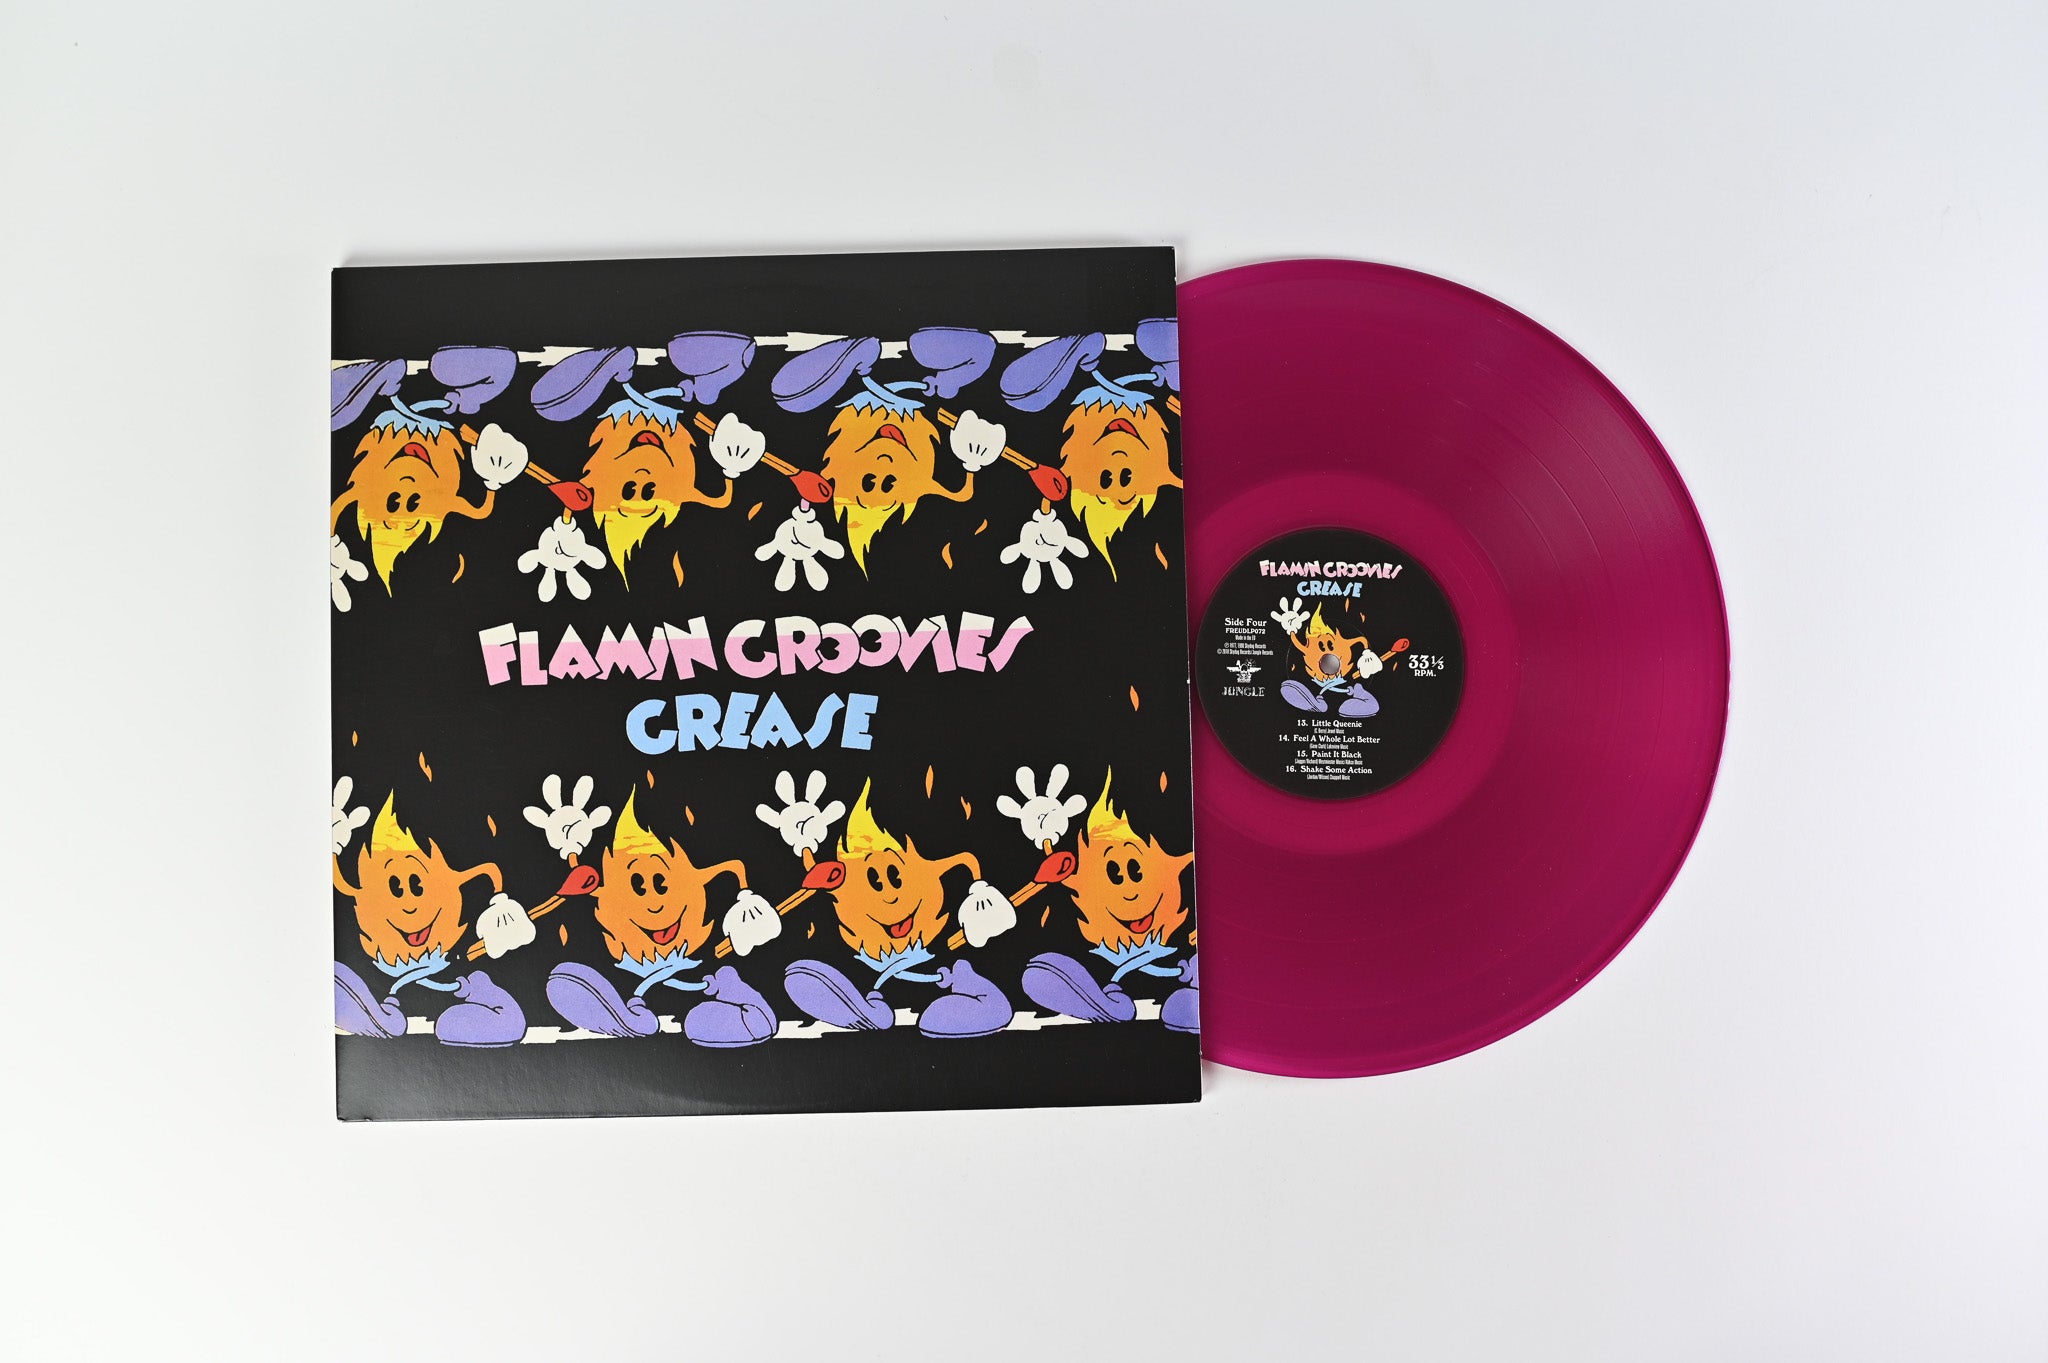 The Flamin' Groovies - Grease on Jungle RSD Ltd Violet Reissue